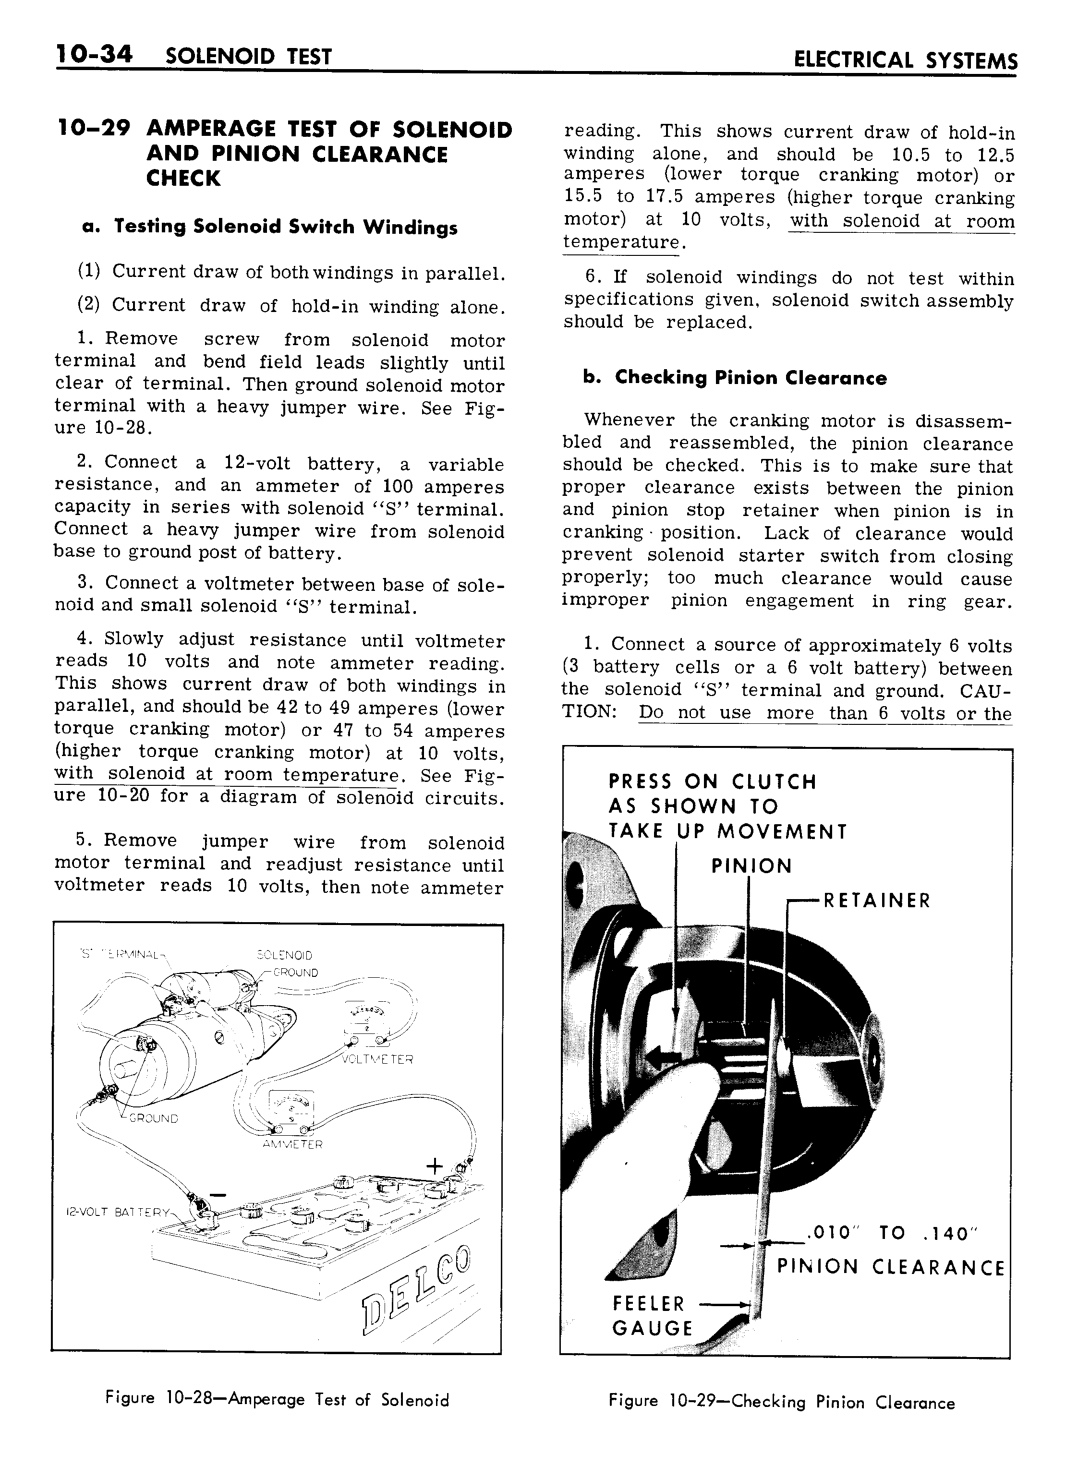 n_10 1961 Buick Shop Manual - Electrical Systems-034-034.jpg